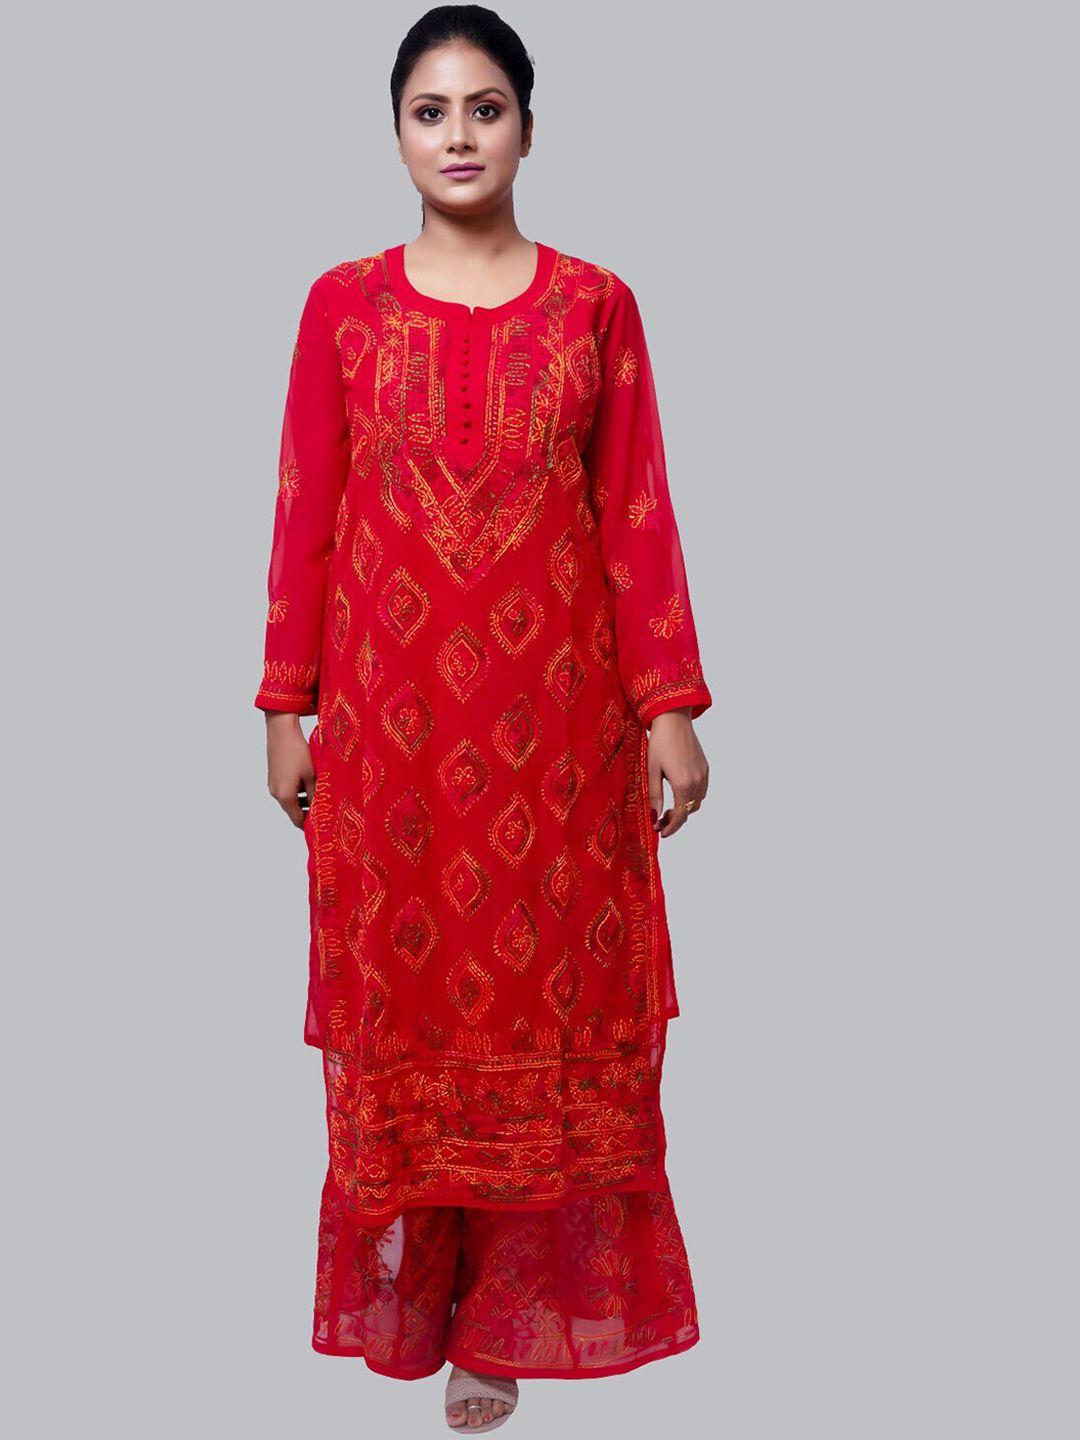 fawoment-women-red-floral-embroidered-thread-work-kurta-with-sharara